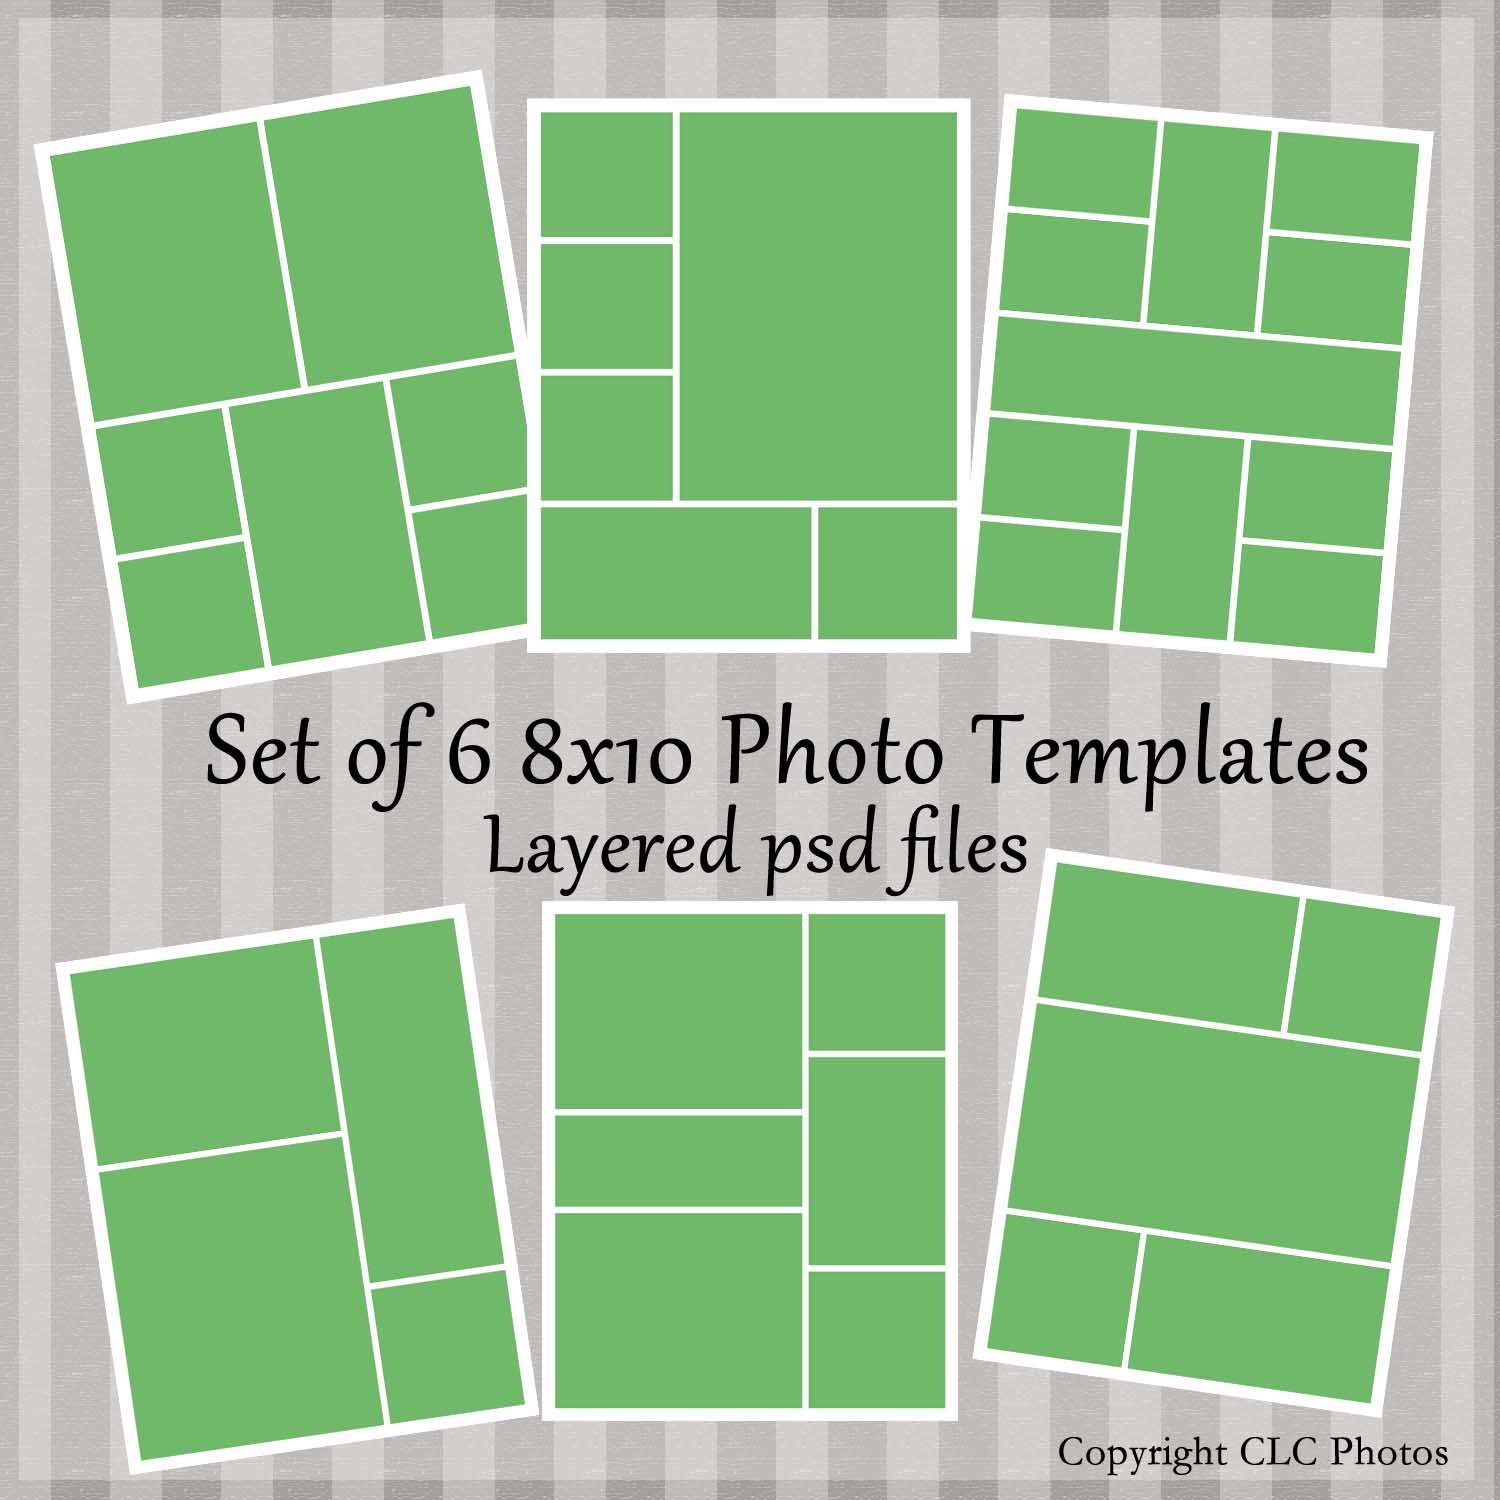 Photo Collage Templates Free Download 8x10 Template Collage Story Board Layered Psd Files Set